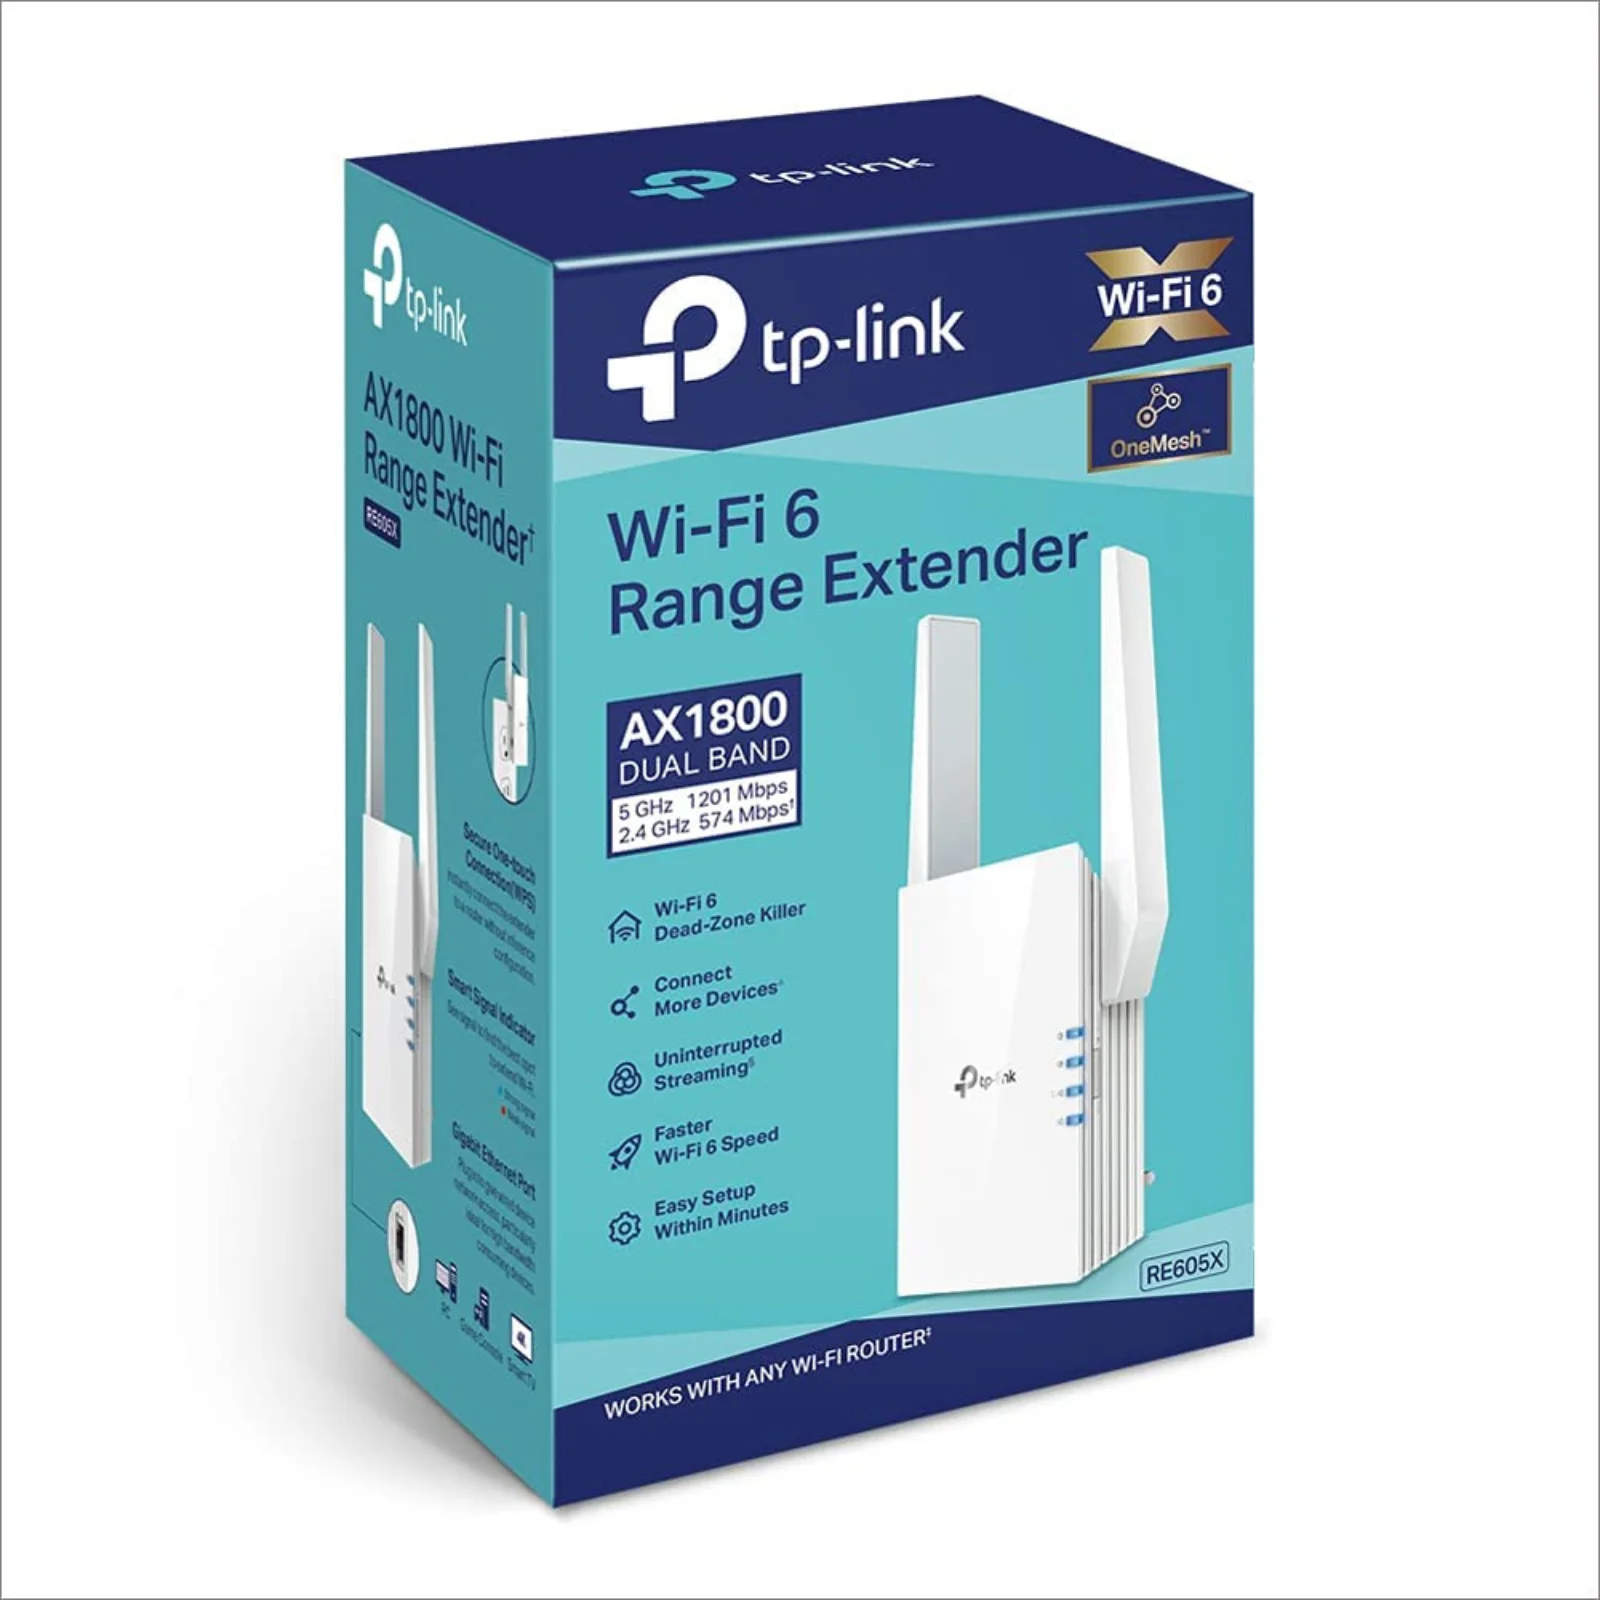 TP-Link AX1800 WiFi 6 Extender(RE605X)-Internet Booster, Covers up to 1500  sq.ft and 30 Devices,Dual Band Repeater up to 1.8Gbps Speed, AP Mode